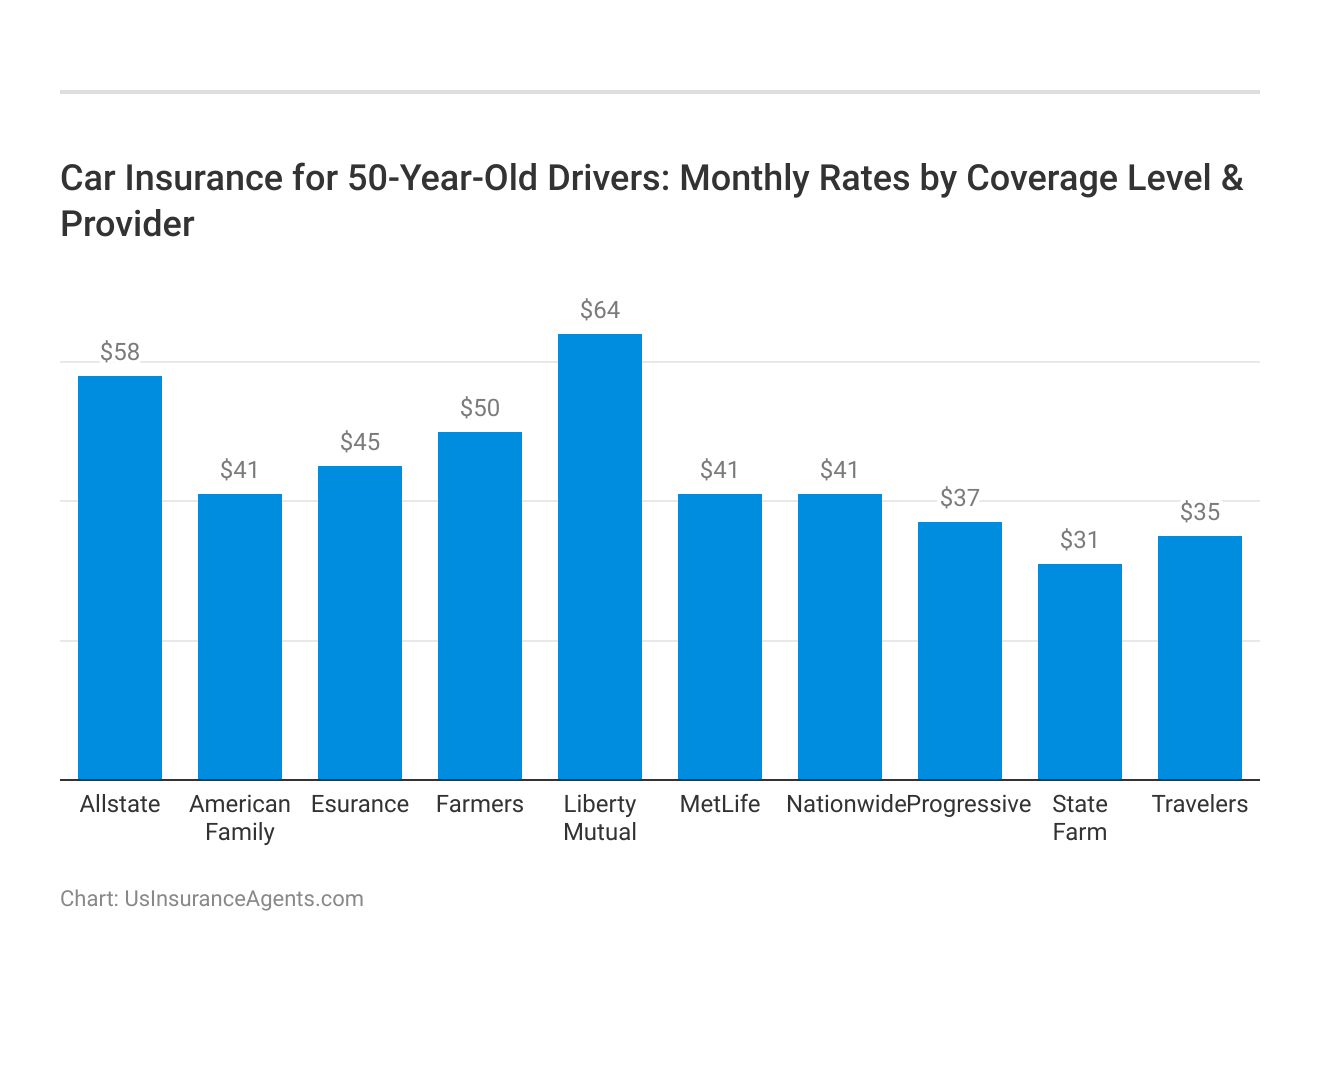 <h3>Car Insurance for 50-Year-Old Drivers: Monthly Rates by Coverage Level & Provider</h3>